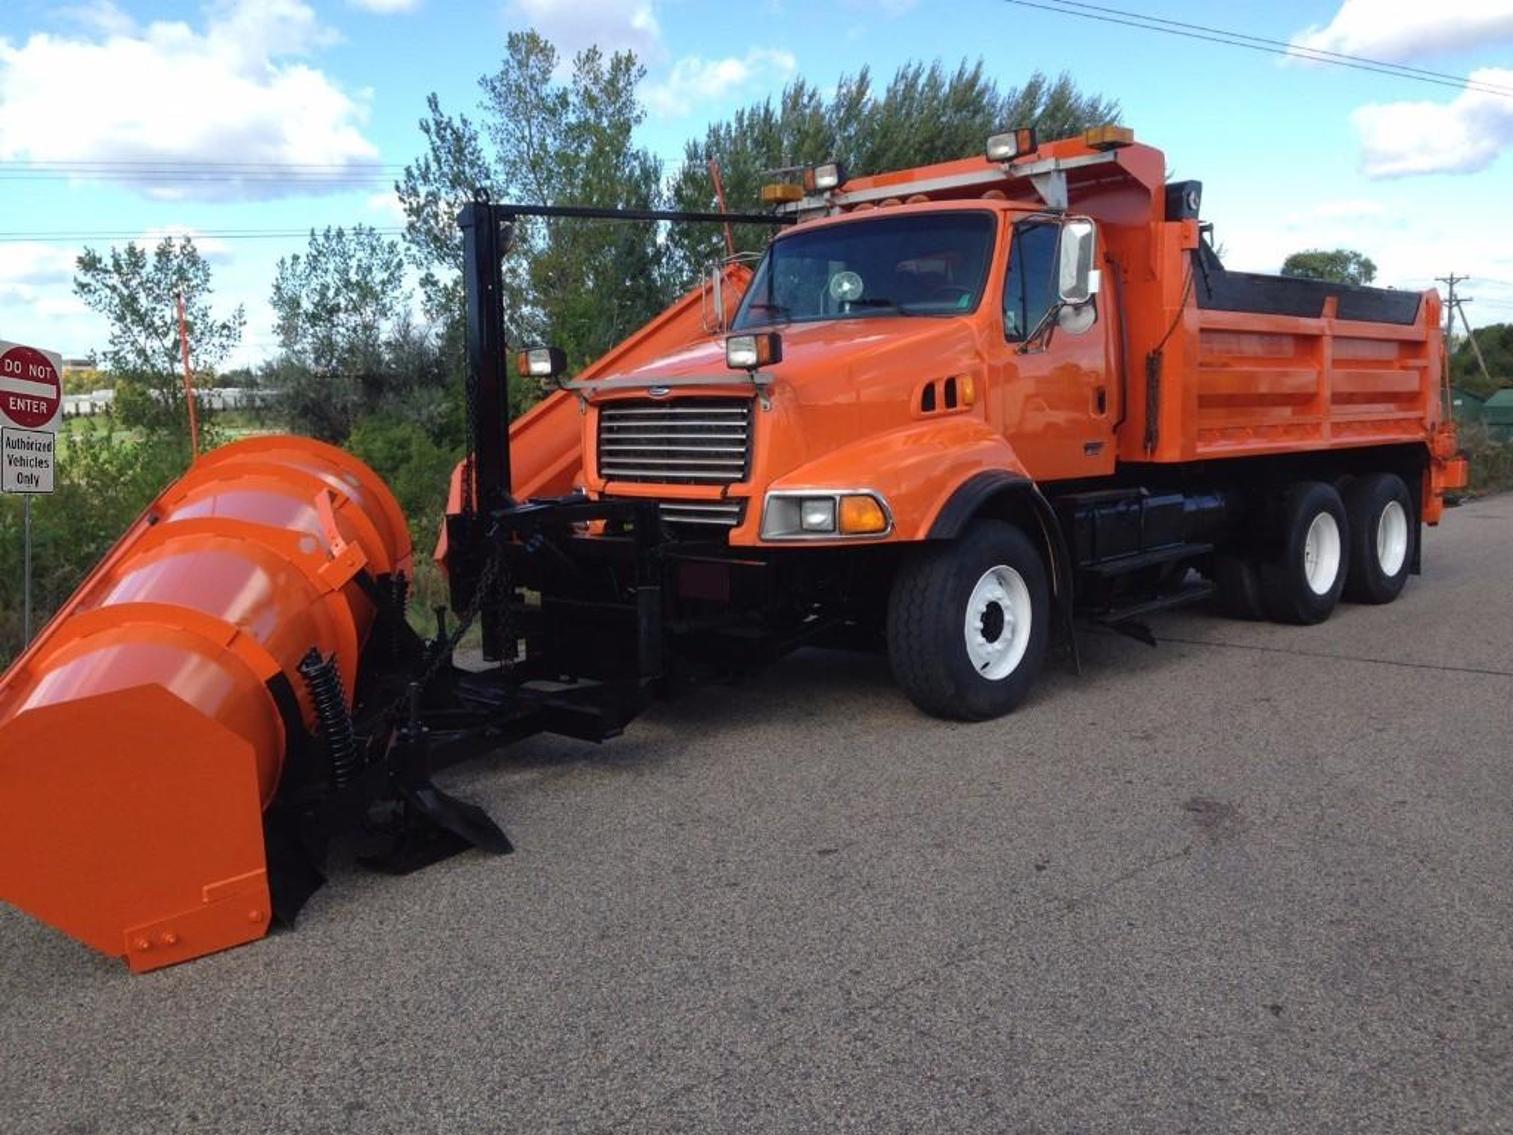 Washington County, Sibley County and Bayfield County Plow Trucks